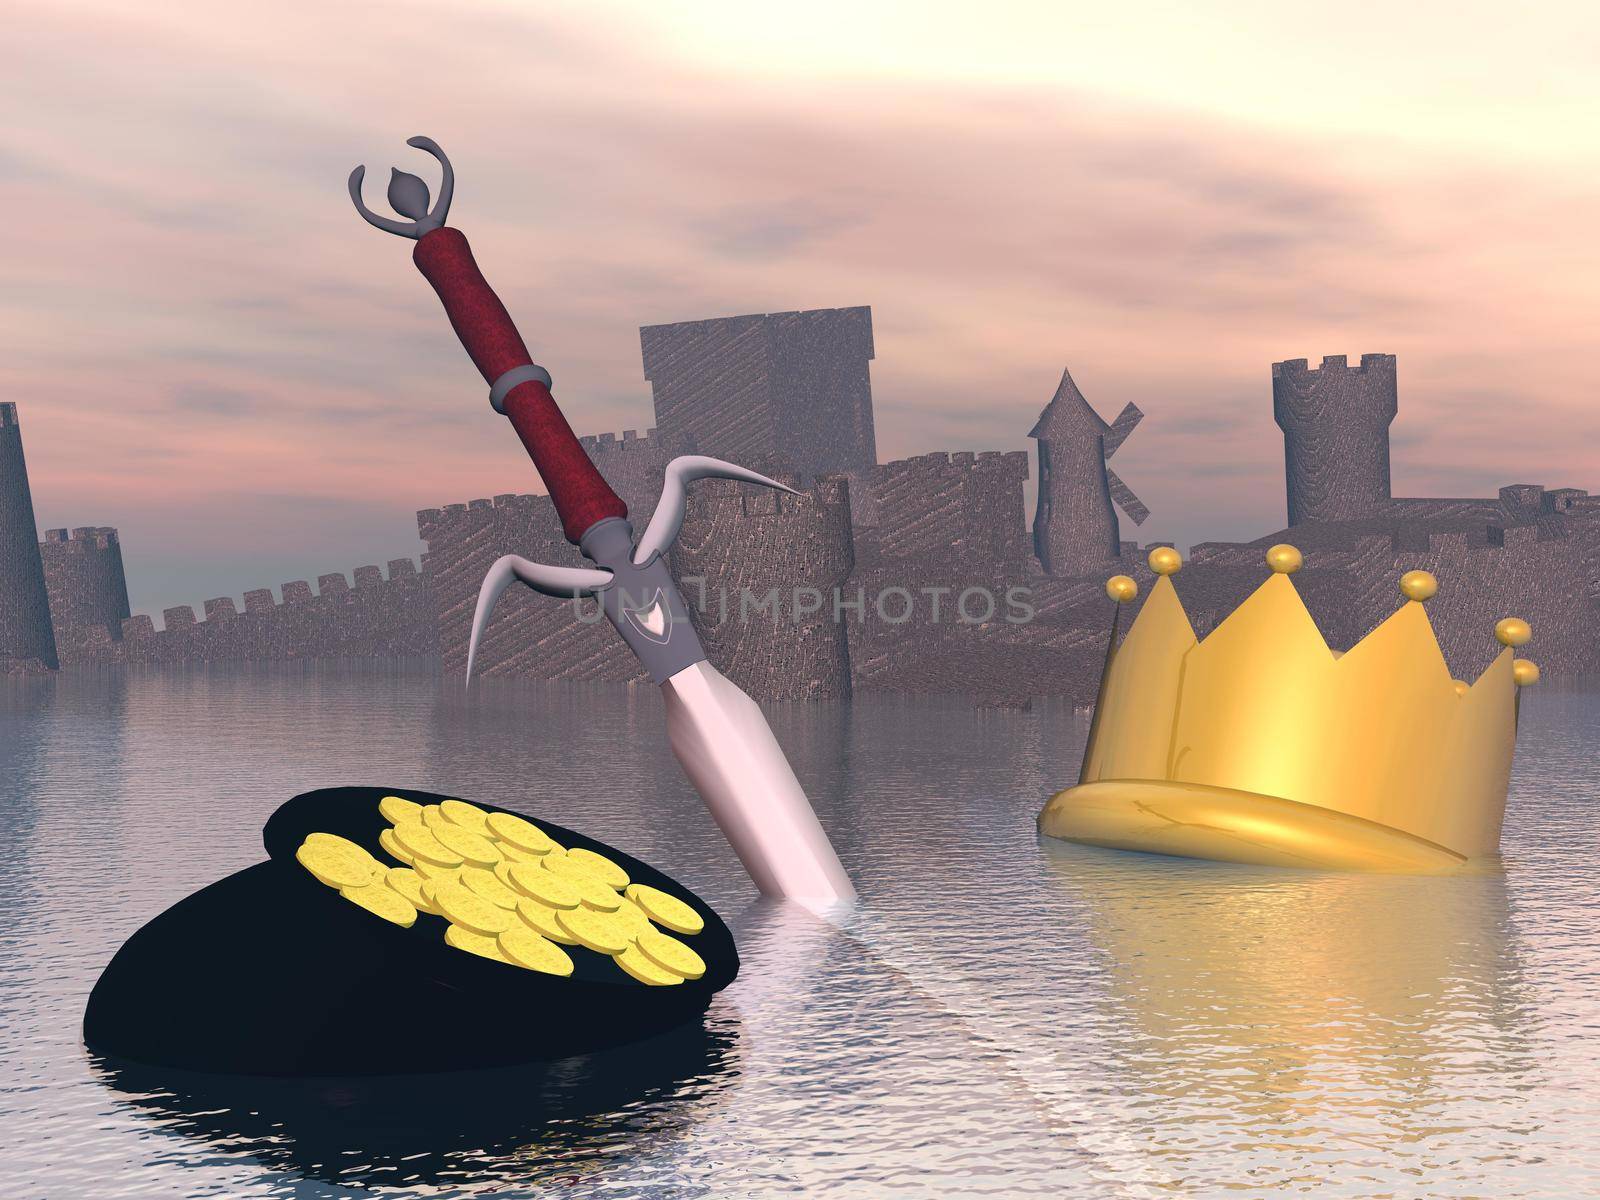 Golden crown, sword, money and castle drowning in water by sunset light